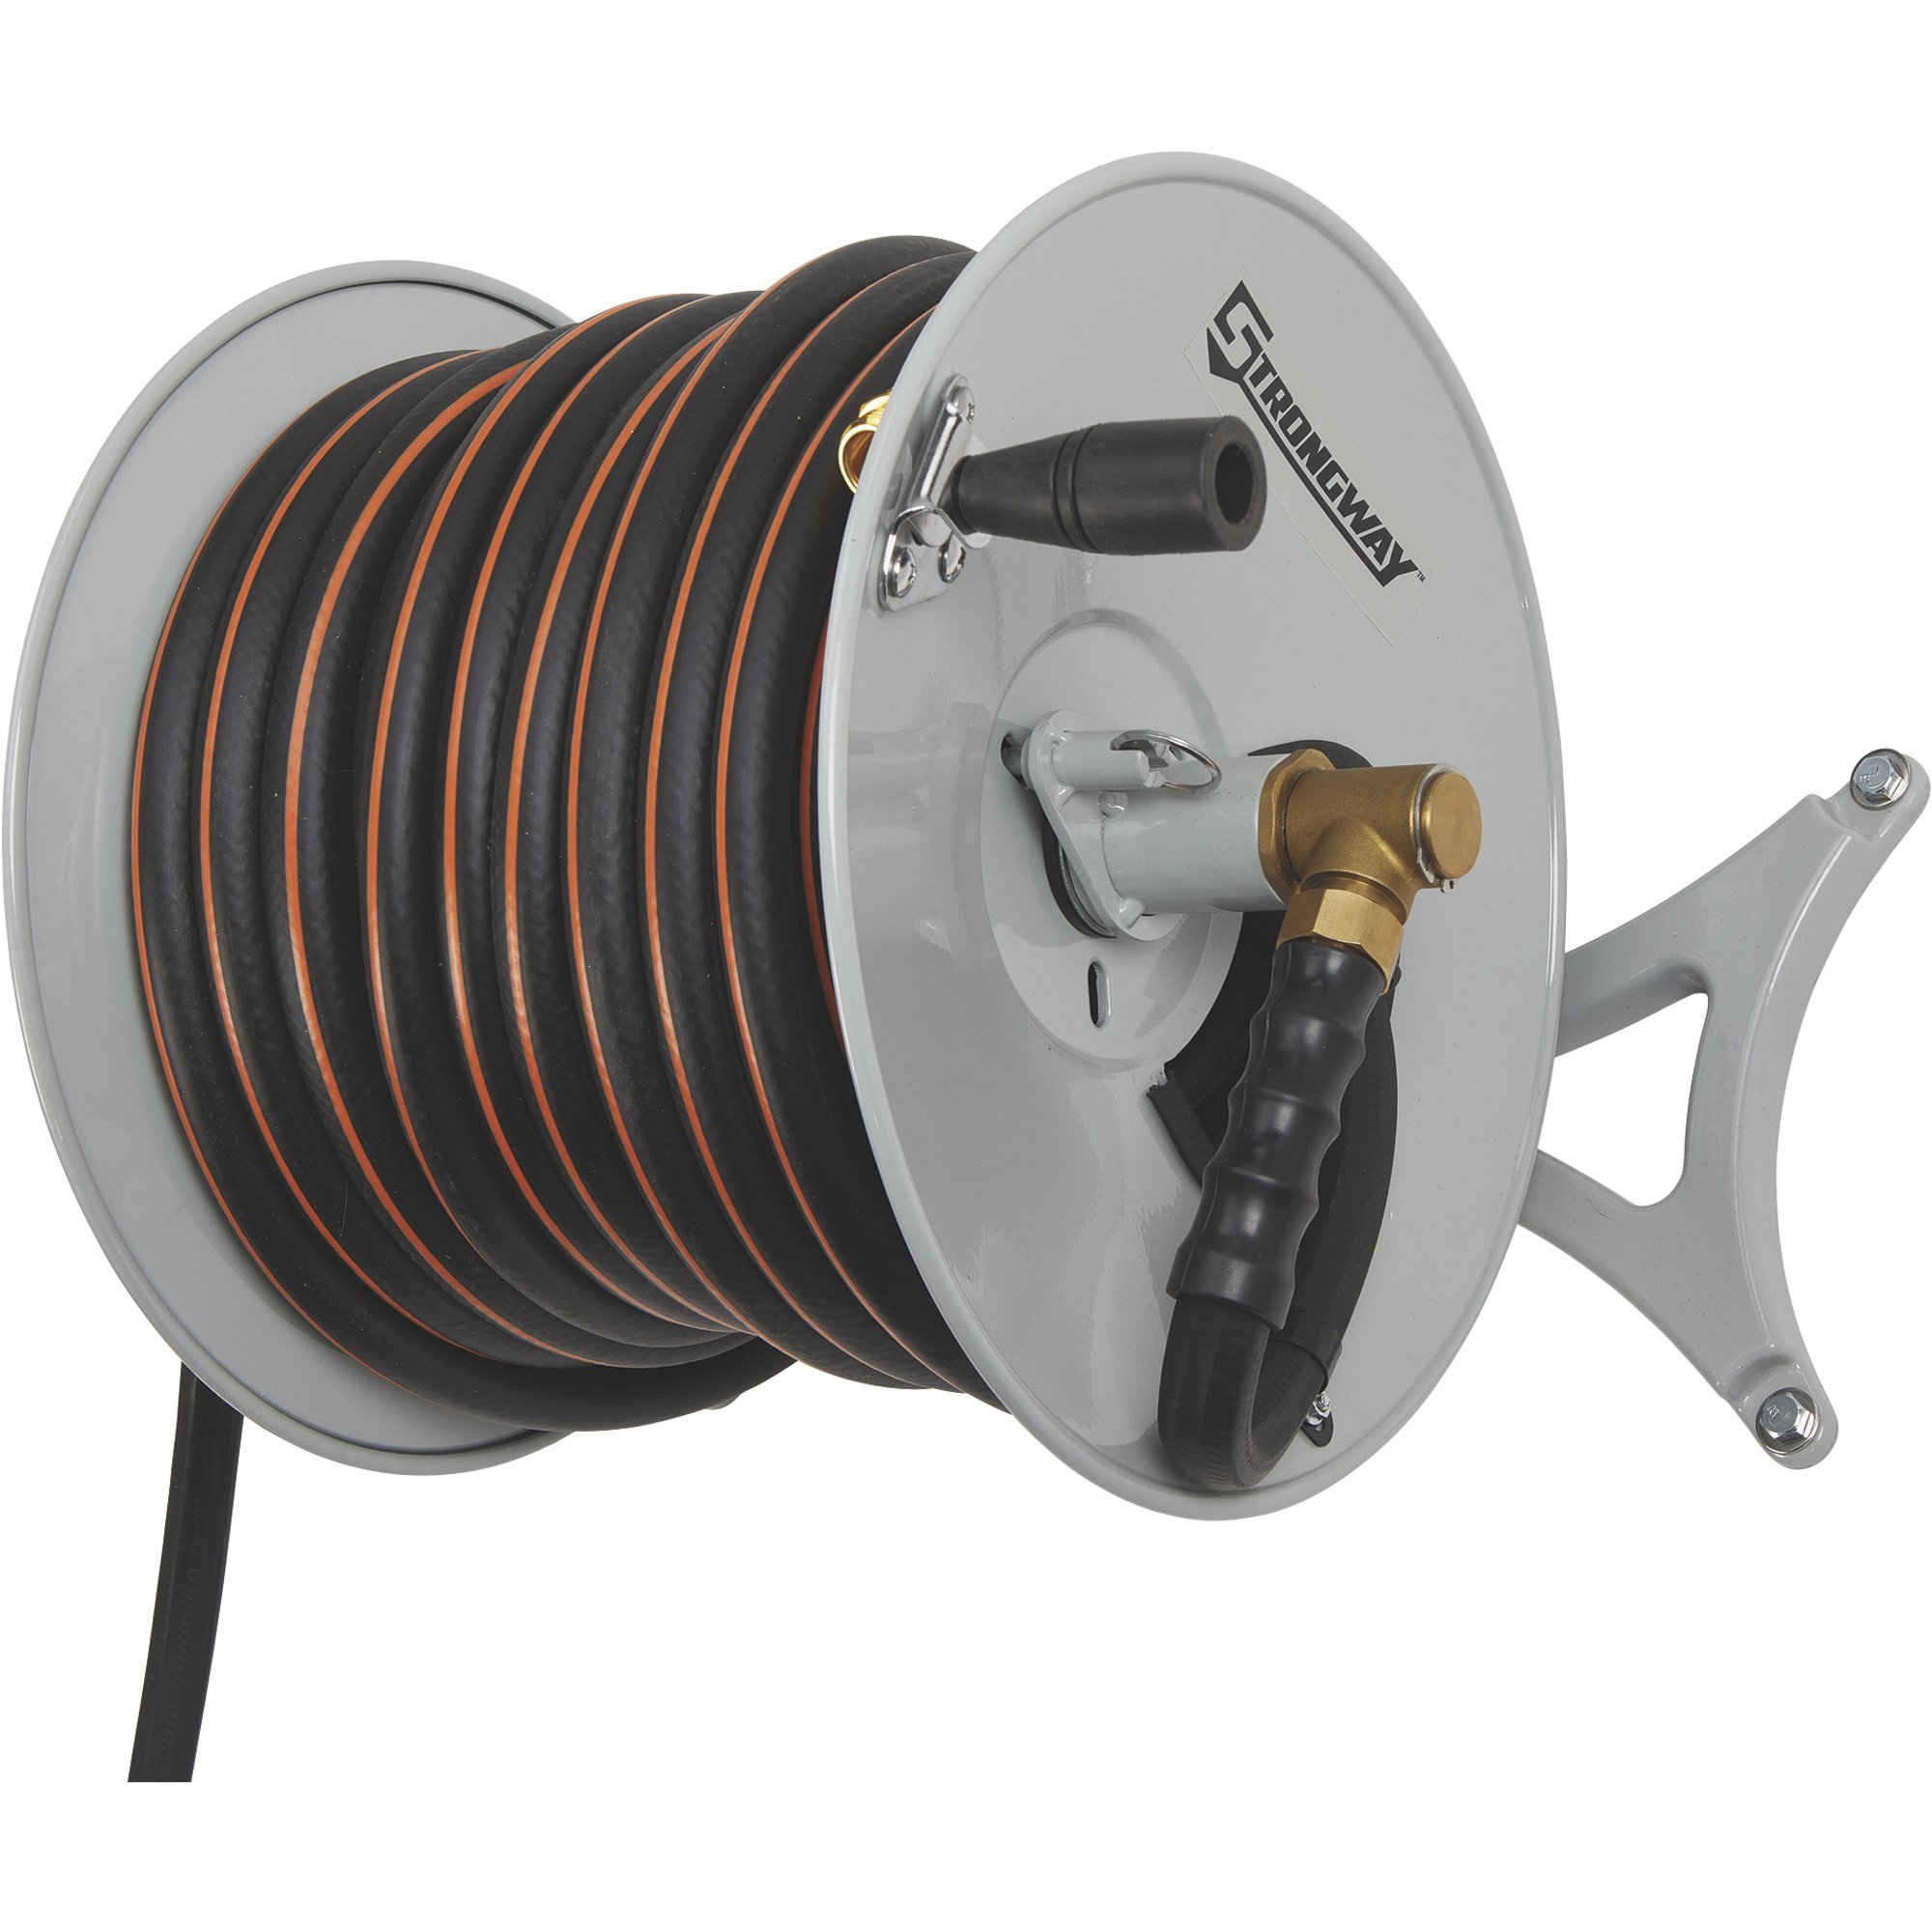 Strongway Wall-Mount Hose Reel with 6ft. Lead-In Hose, Holds 5/8in. x  150ft. Hose